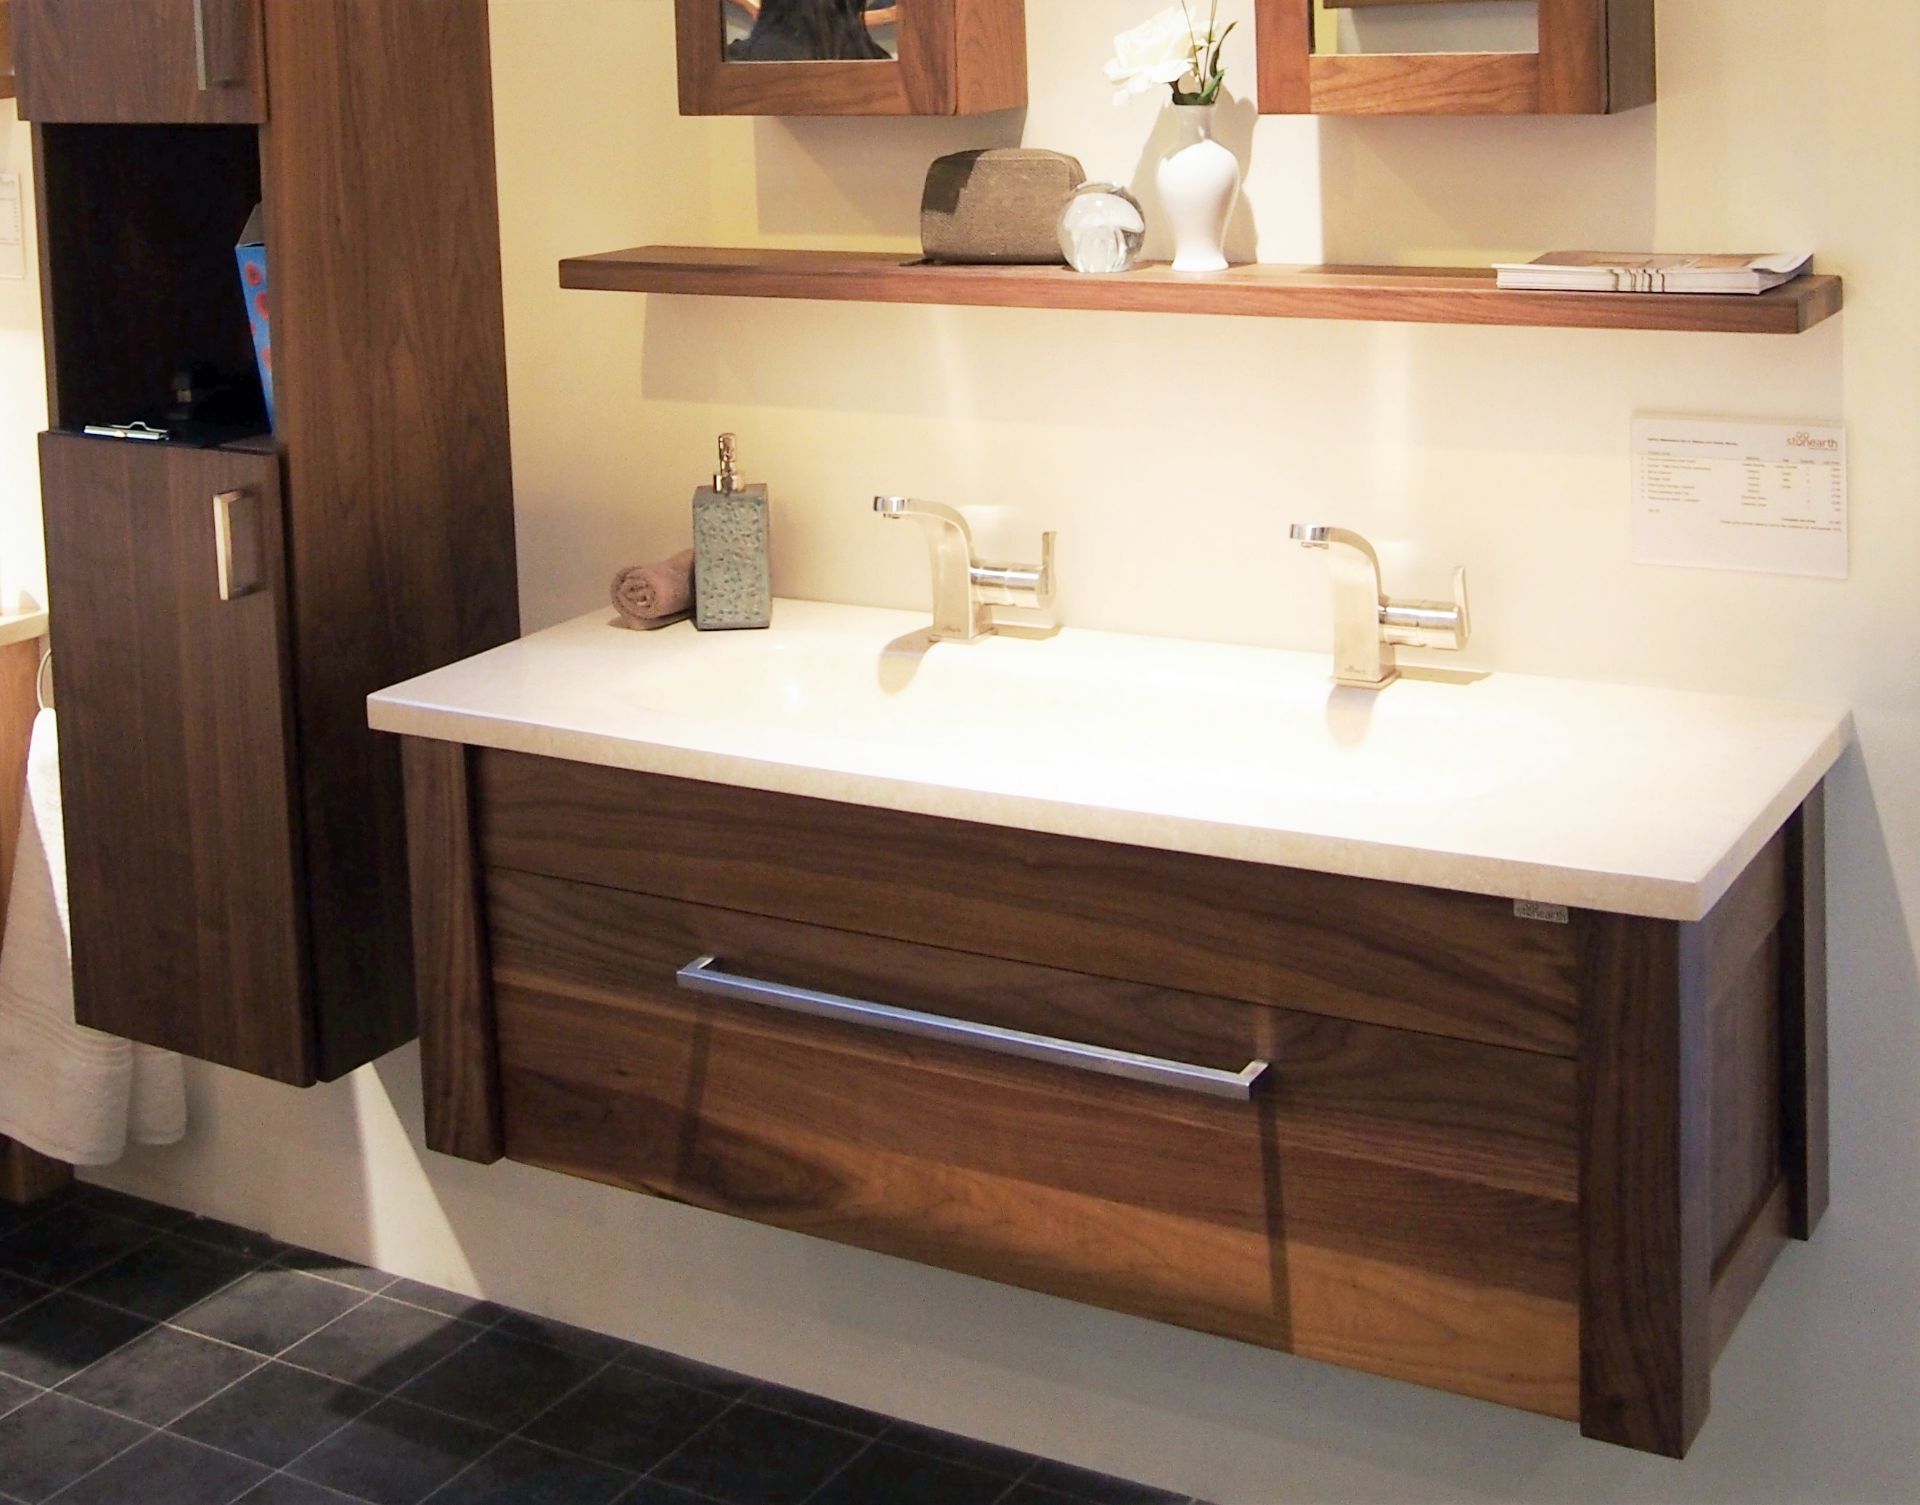 1 x Stonearth 'Venice' Wall Mounted 1200mm Washstand - American Solid Walnut - Original RRP £1,270